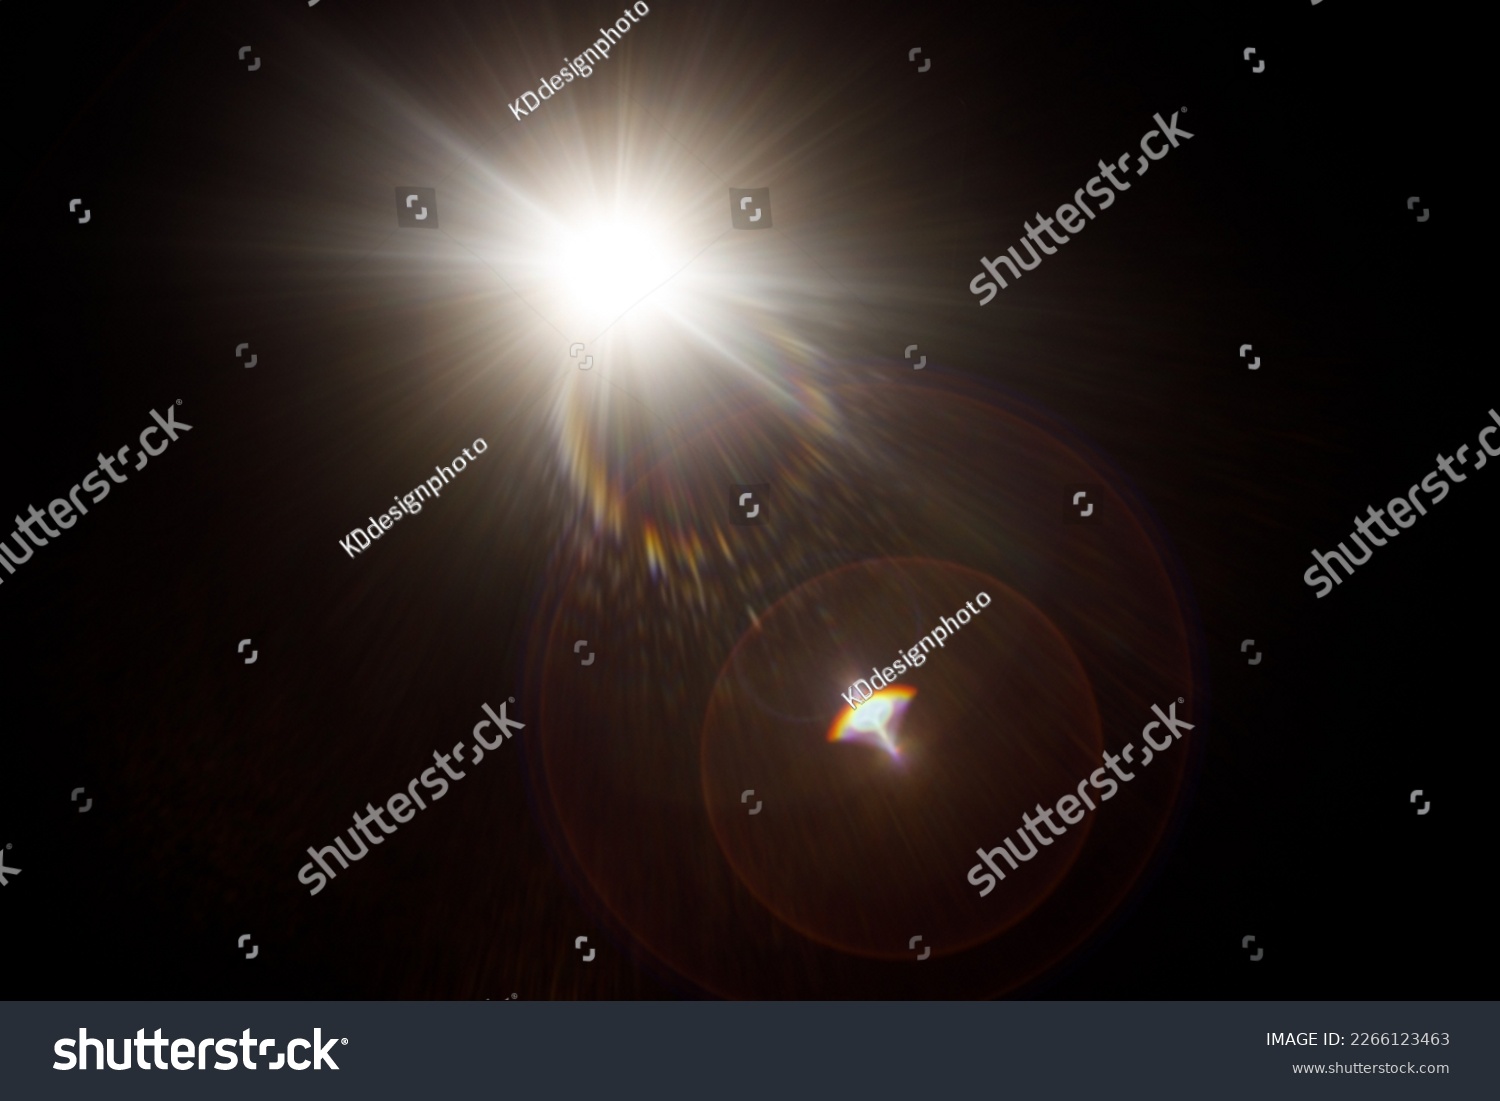 Easy to add lens flare effects for overlay designs or screen blending mode to make high-quality images. Abstract sun burst, digital flare, iridescent glare over black background. #2266123463